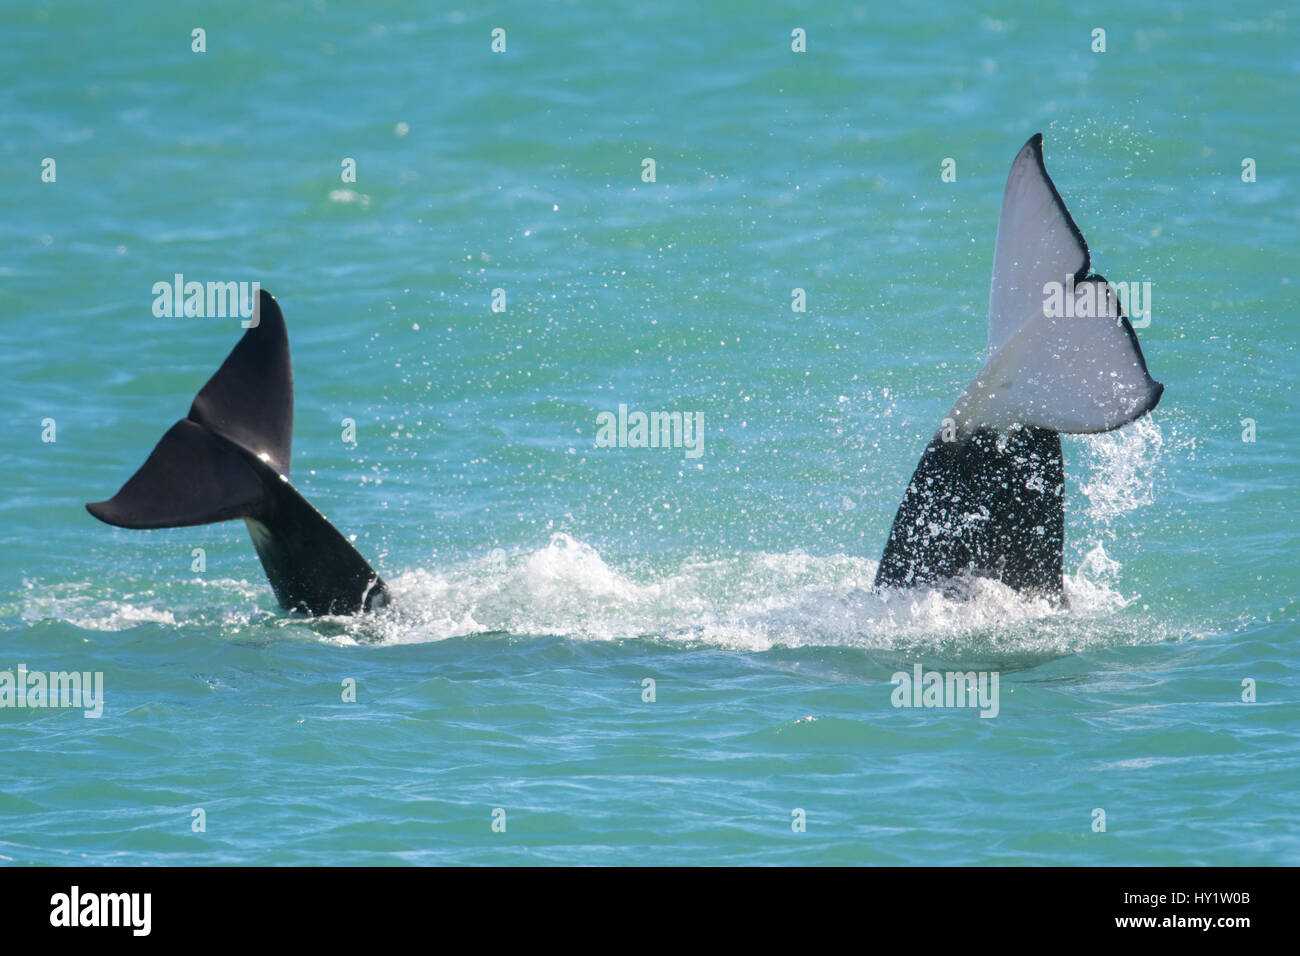 Orca whales (Orcinus orca) two diving with caudal fins out of water. Punta Norte Natural Reserve, Peninsula Valdes, Chubut Province, Patagonia Argentina Stock Photo